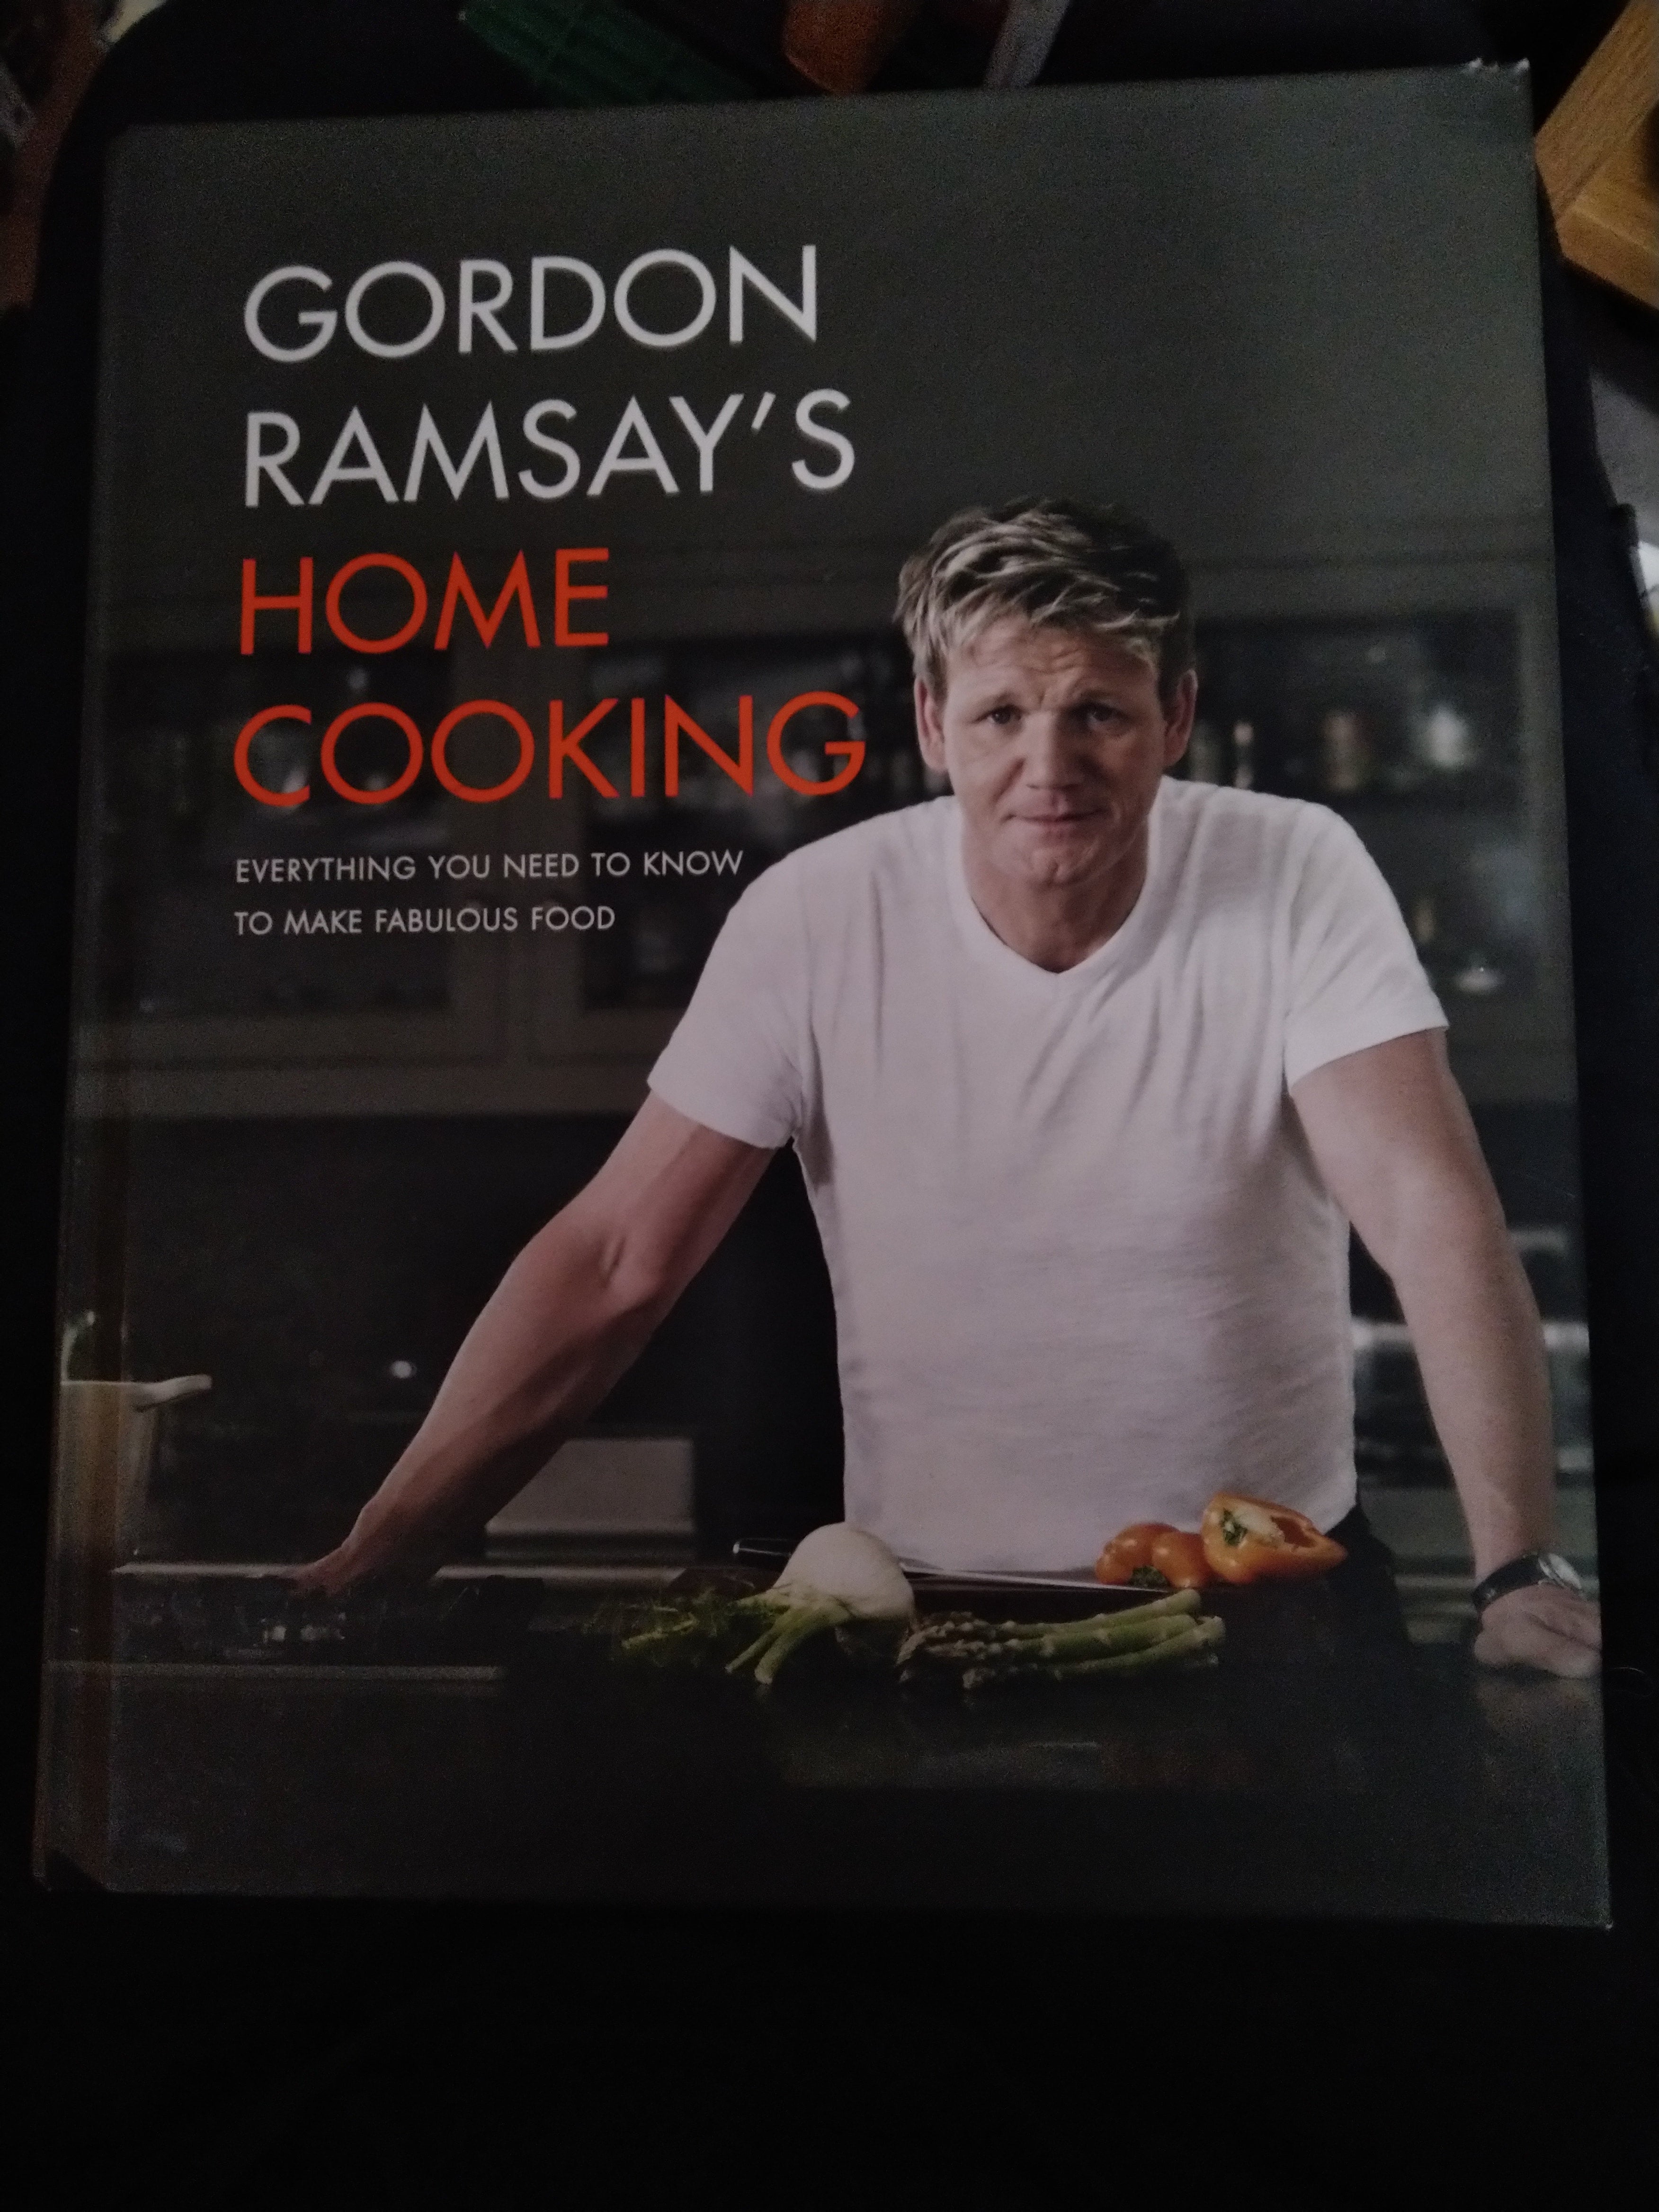 Food　To　To　Ramsay's　You　Cooking:　Everything　Make　Fabulous　Home　Bruised　Know　Gordon　Barely　Need　Books